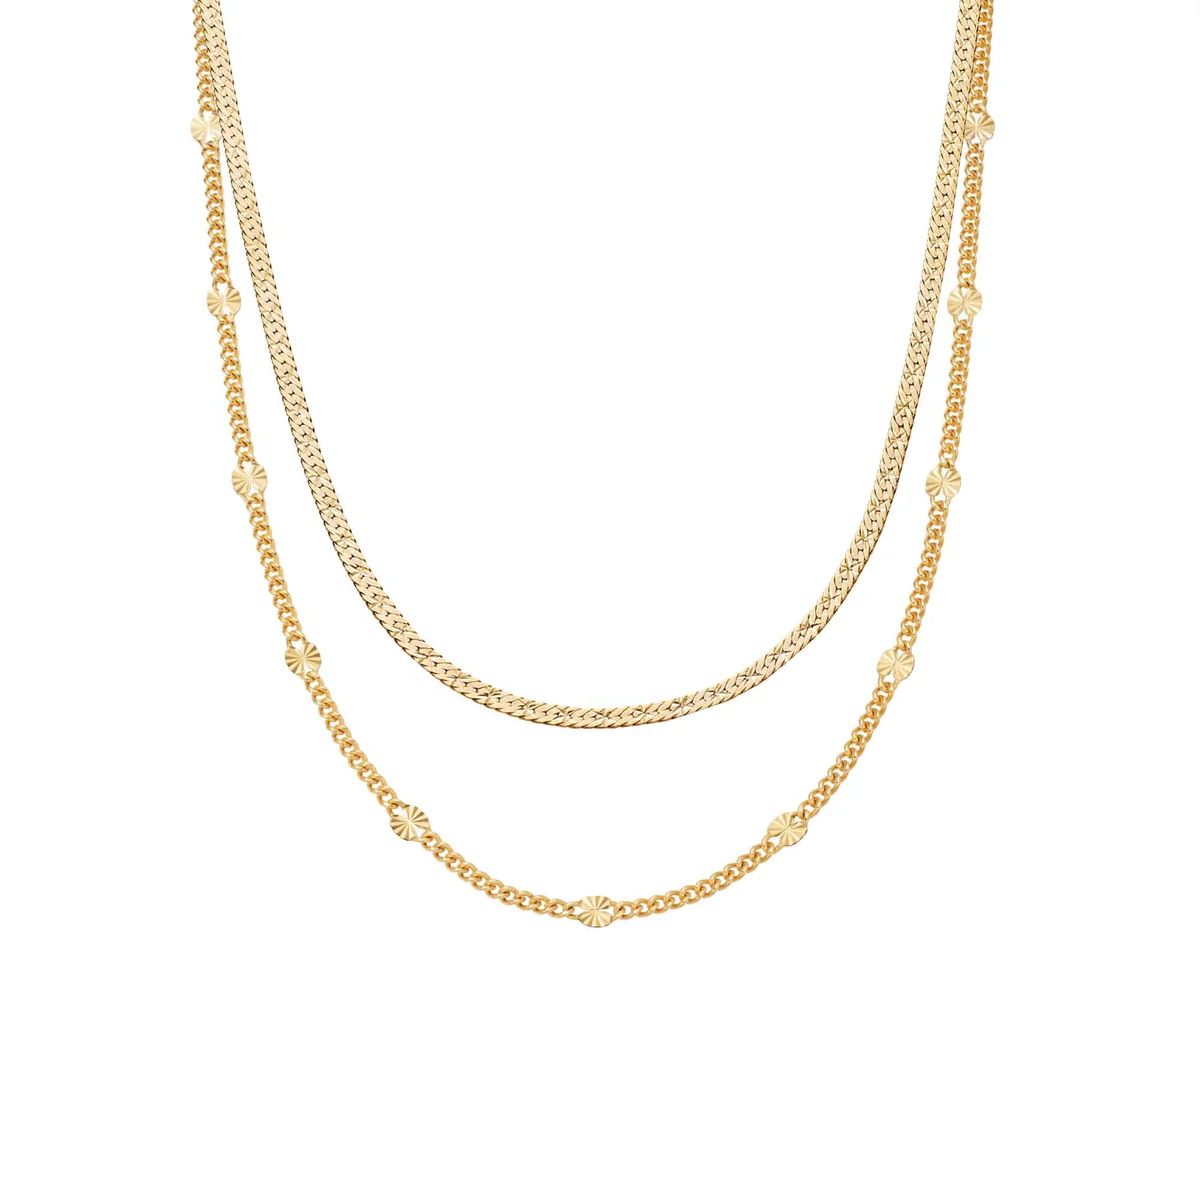 'You Give Me Light' Layering Necklace Set 18ct Gold Plate | Daisy London Jewellery